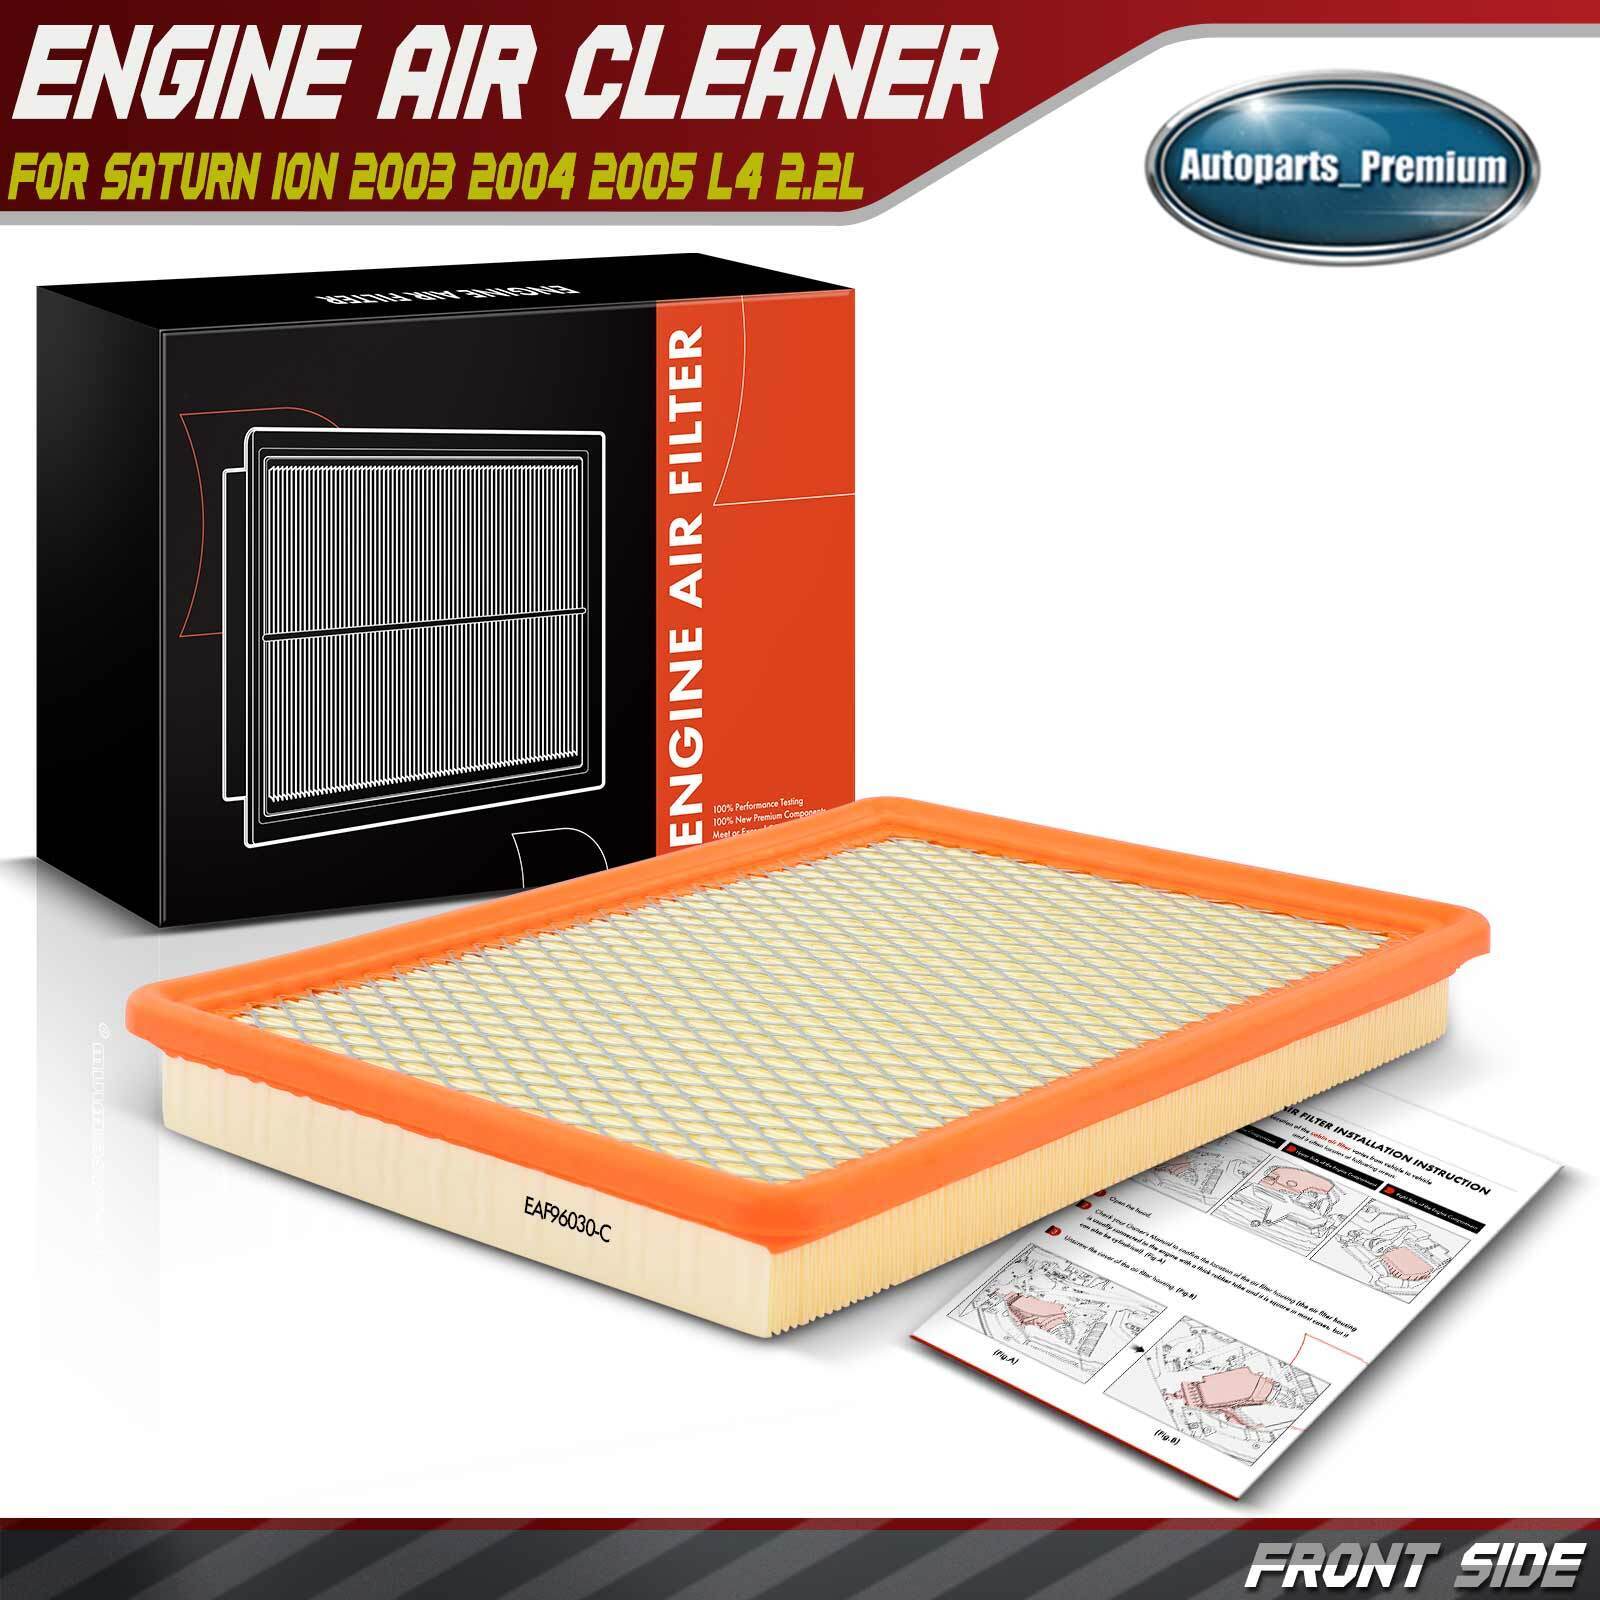 New Engine Air Filter for Saturn Ion 2003 2004 2005 L4 2.2L 22679620 Cellulose